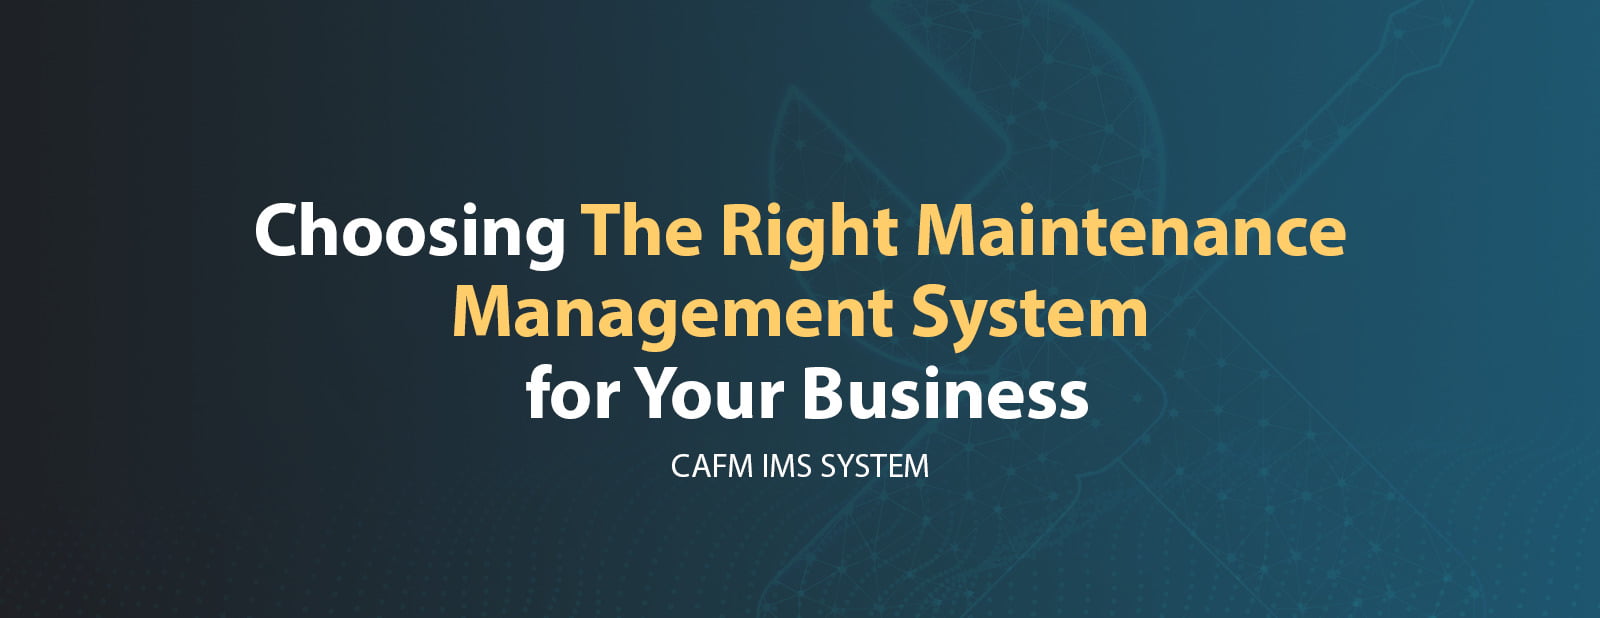 Choosing The Right Maintenance Management System for Your Business